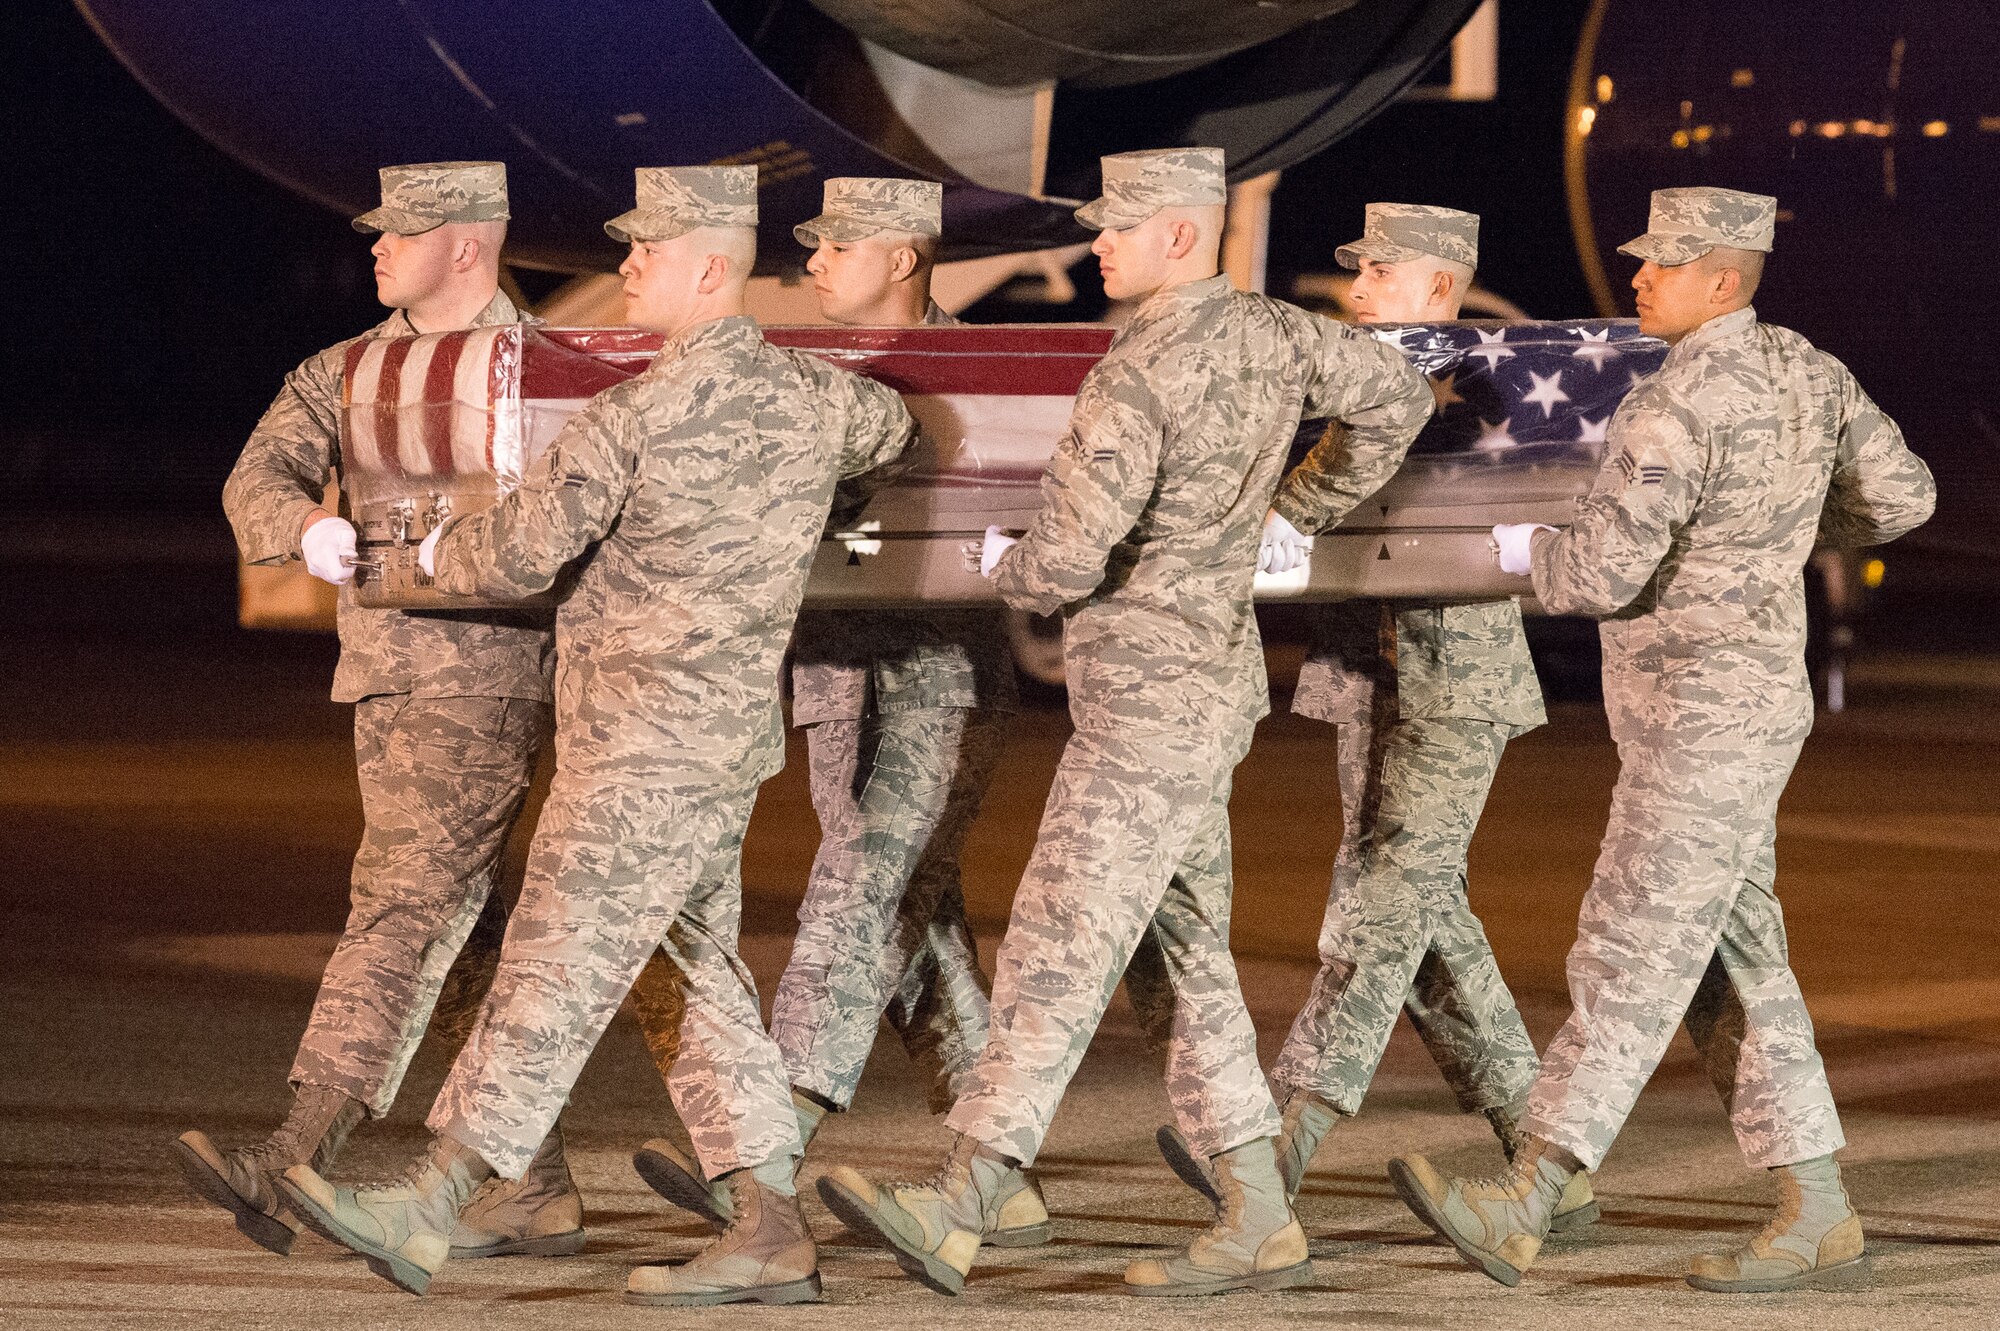 Dignified transfer for Air Force Staff Sgt. Albert J. Miller